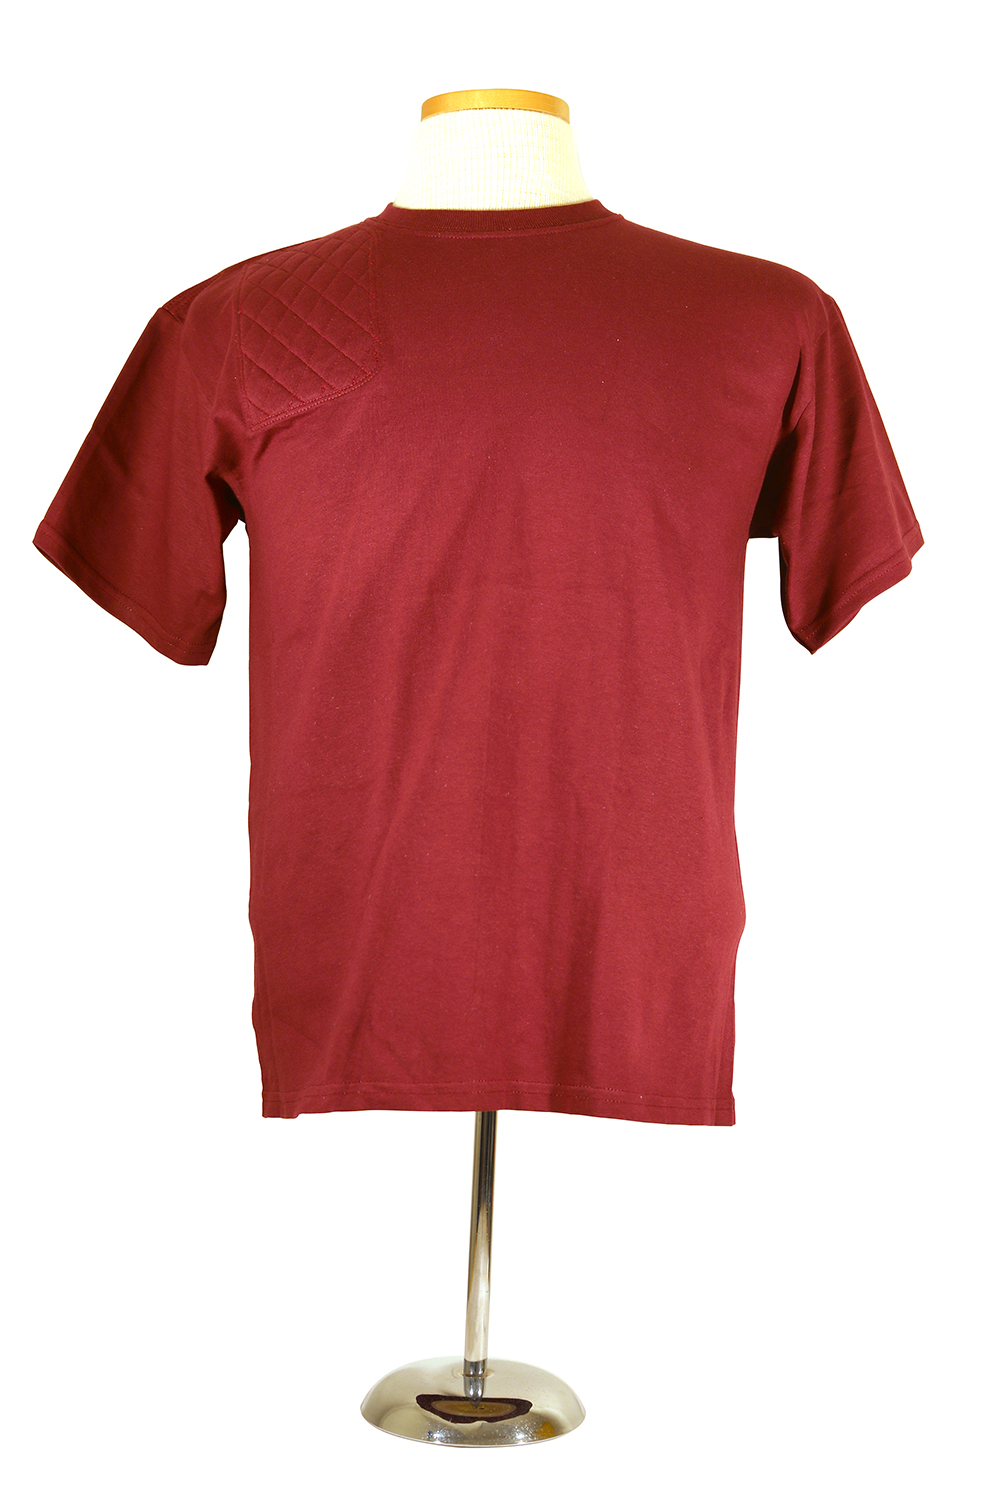 #2000B youth cotton t shirt - maroon right hand double layer pad